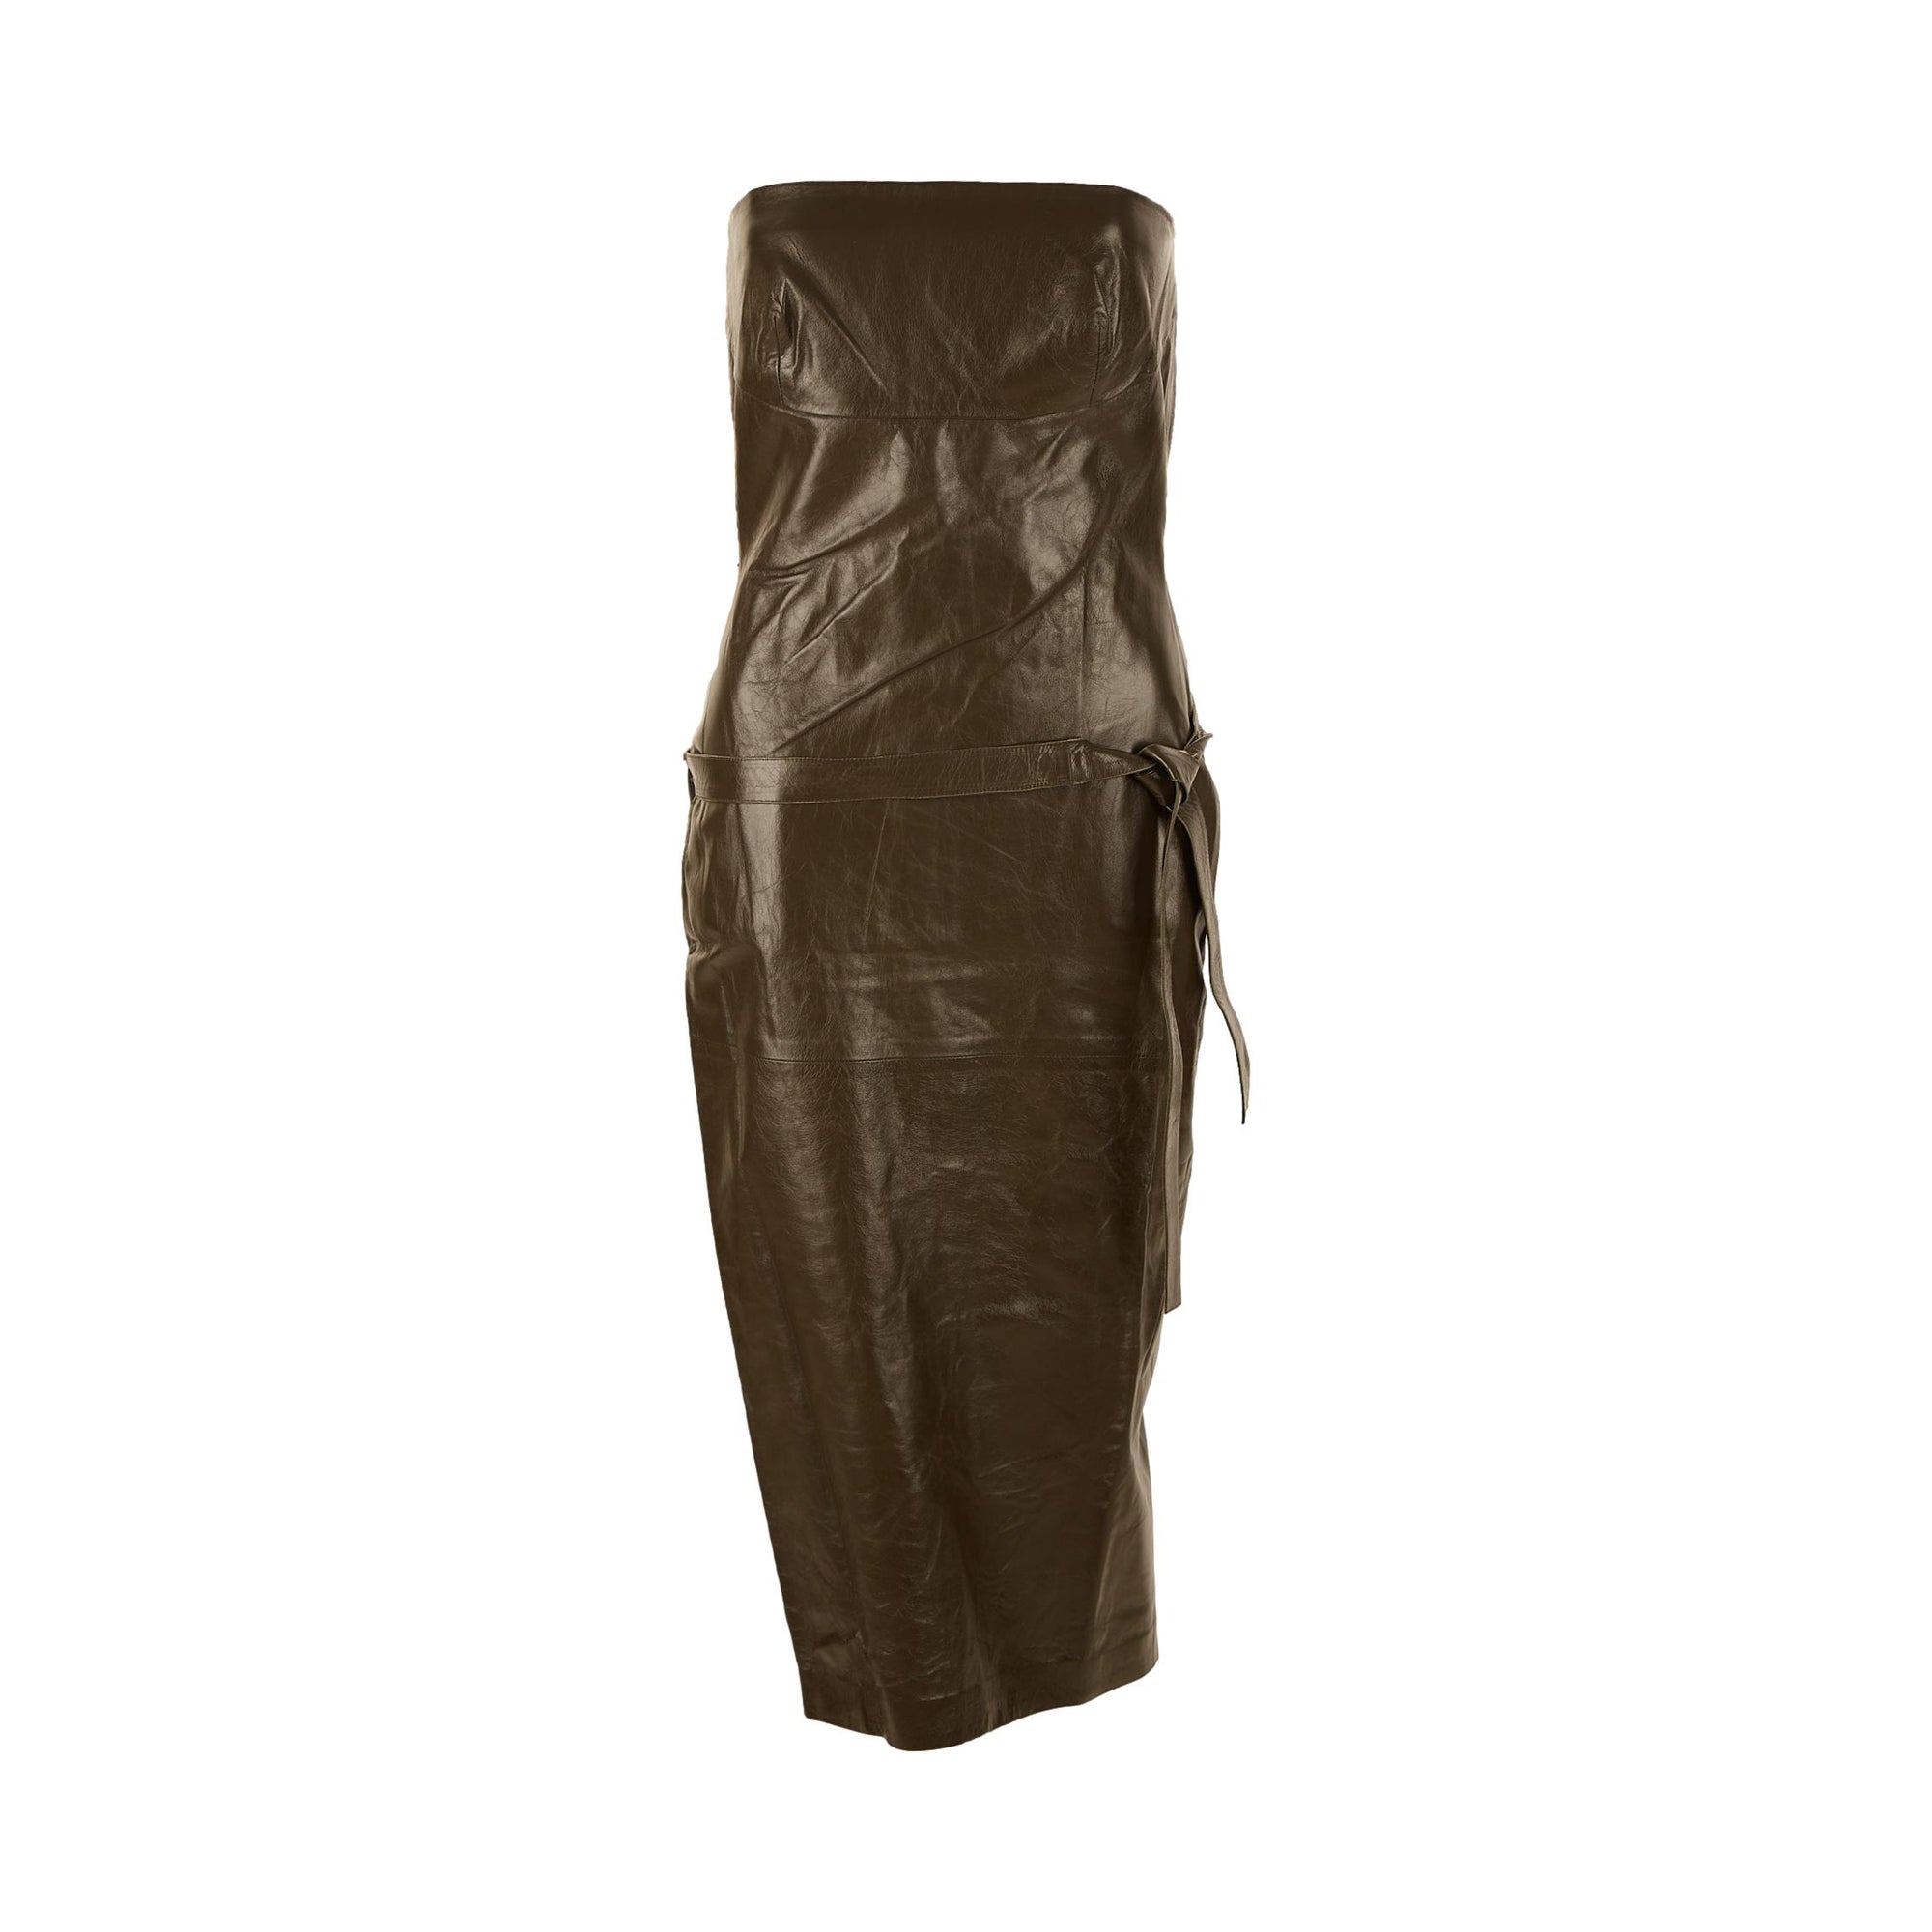 Gucci Olive Leather Dress